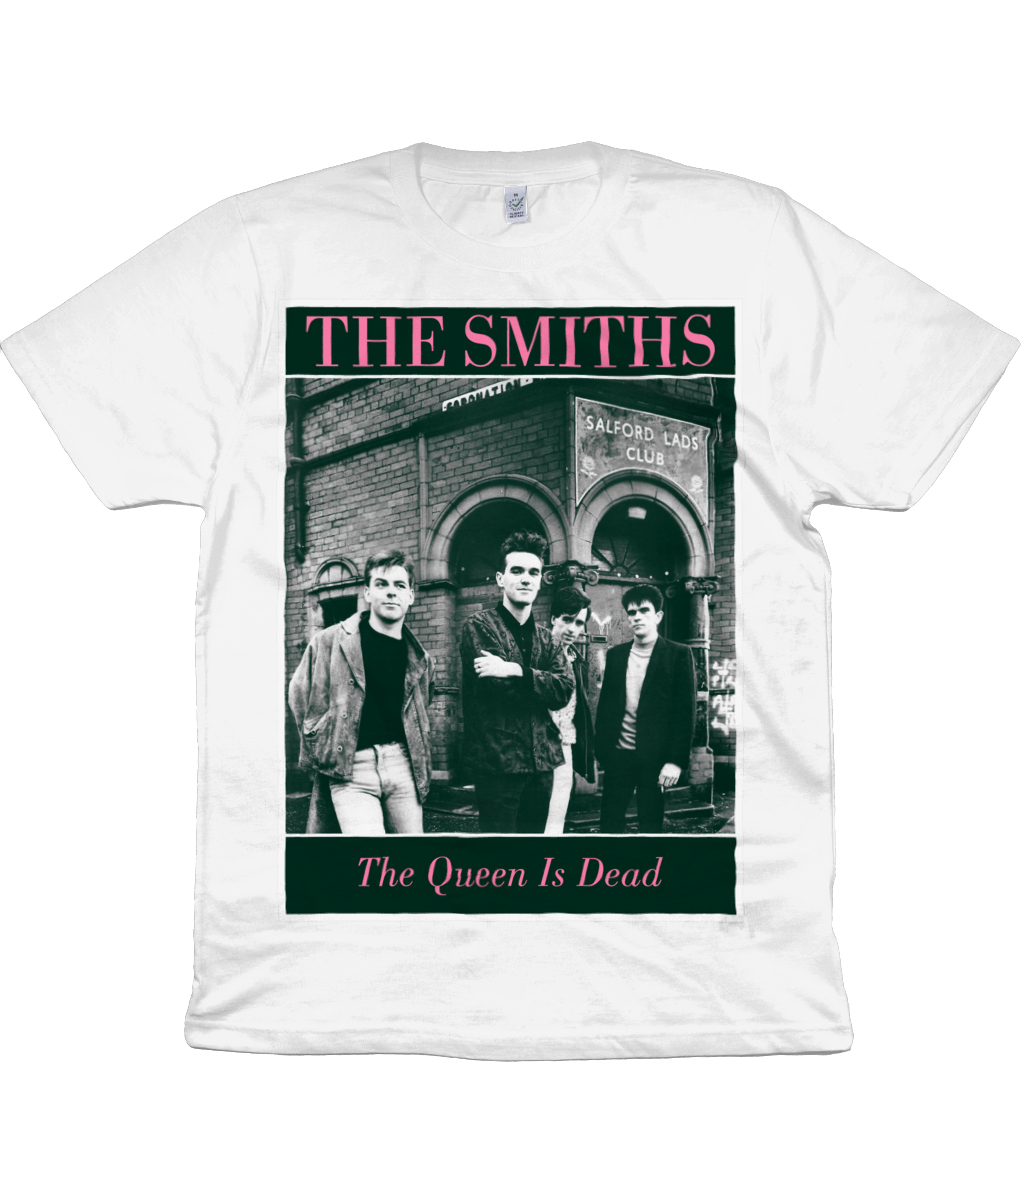 THE SMITHS -The Queen Is Dead - 1986 - Salford Lads Club